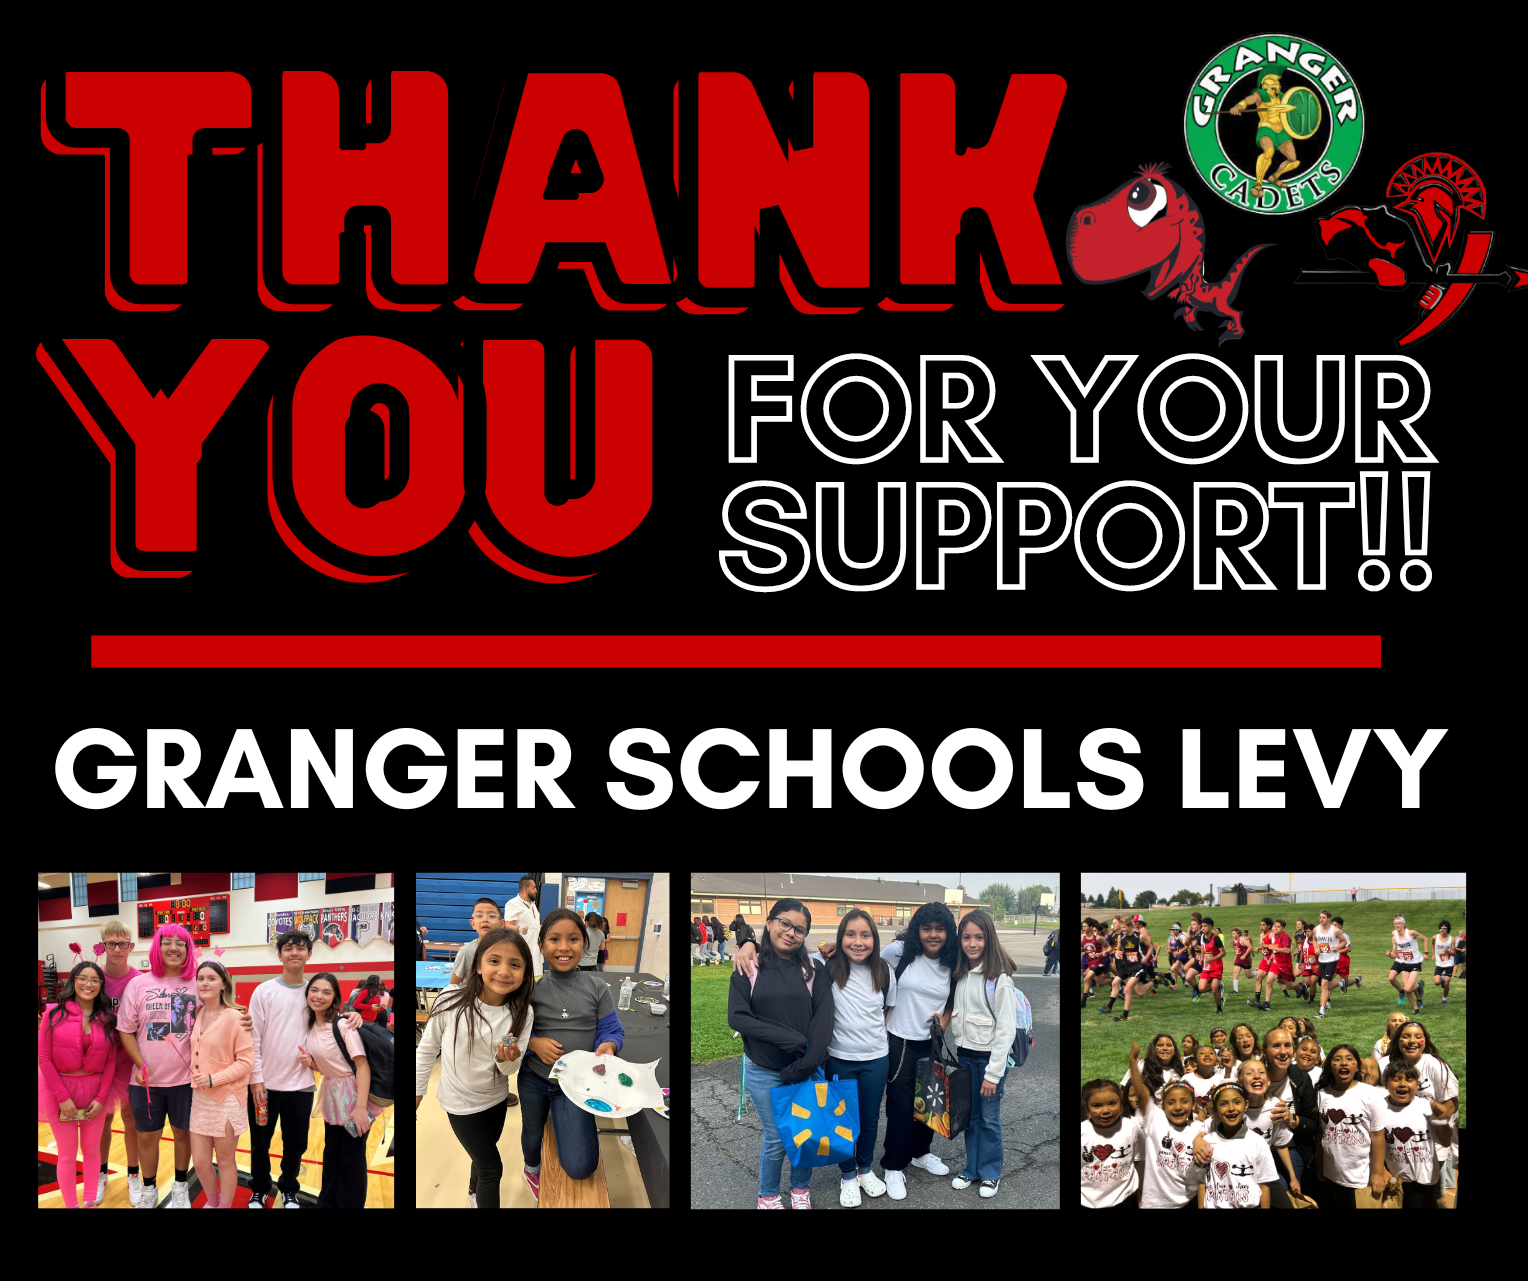 Thank you to community for passing the levy